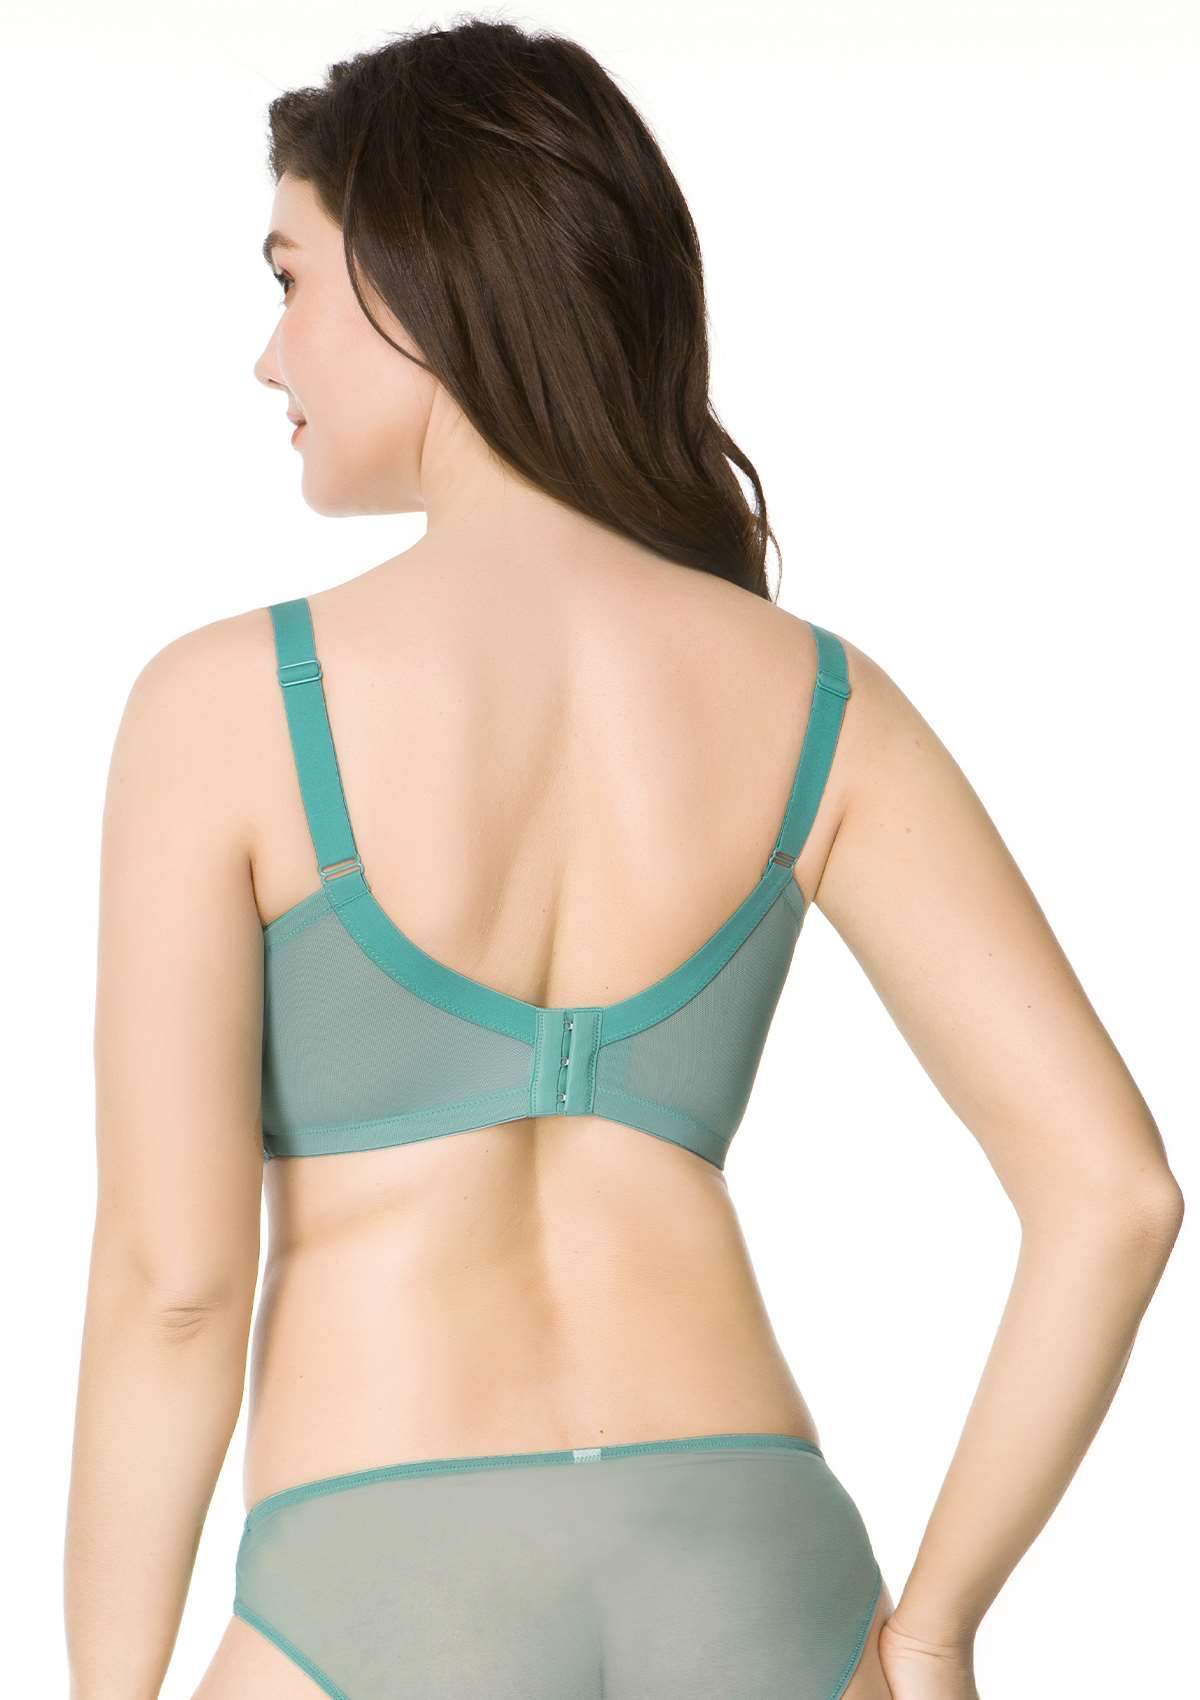 HSIA Paeonia Lace Full Coverage Underwire Non-Padded Uplifting Bra - Teal / 42 / D